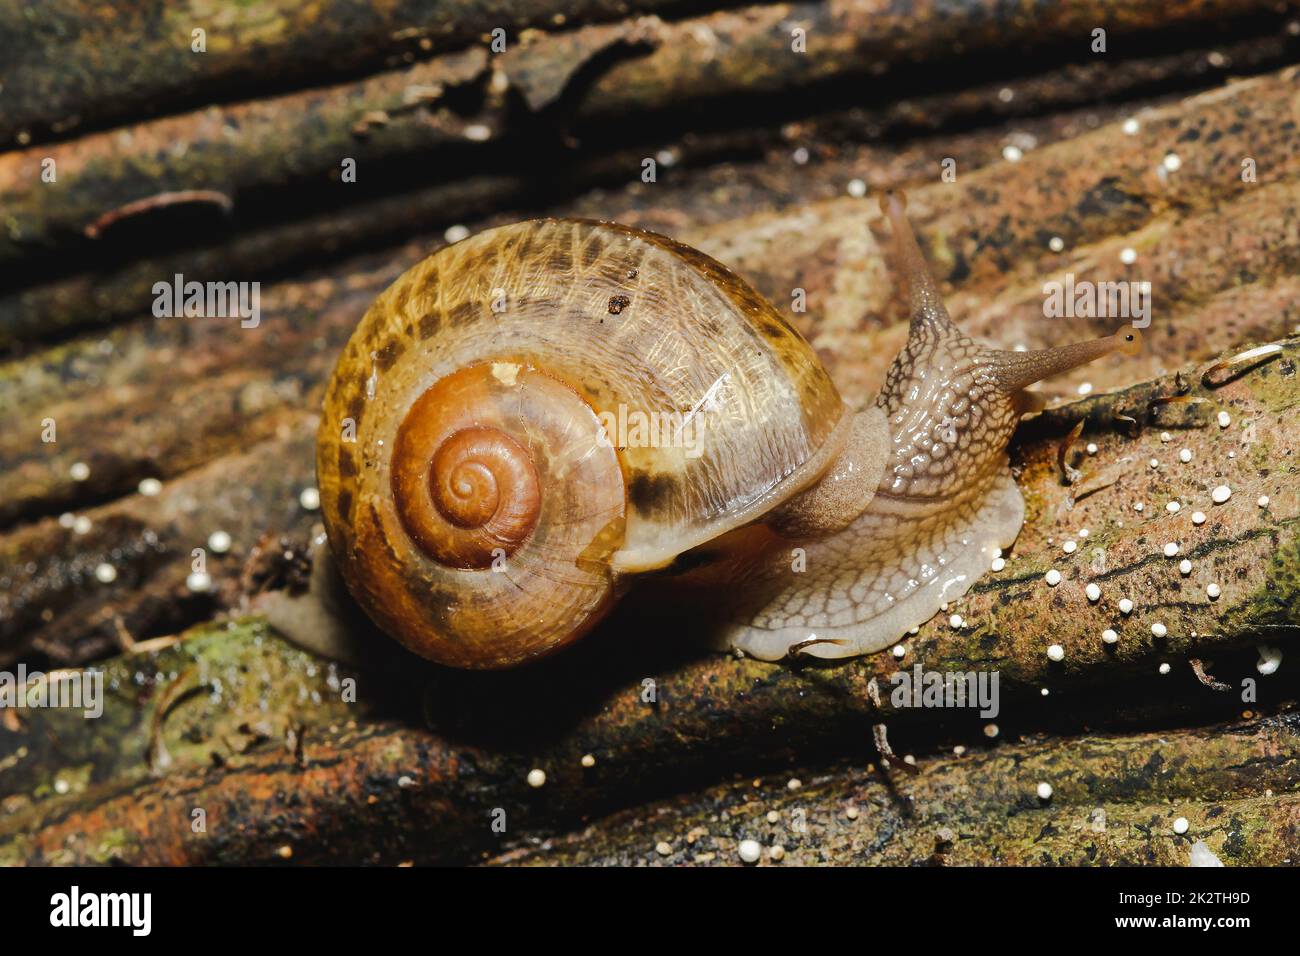 Snail on the tree in nature Snails are classified as invertebrates. Stock Photo